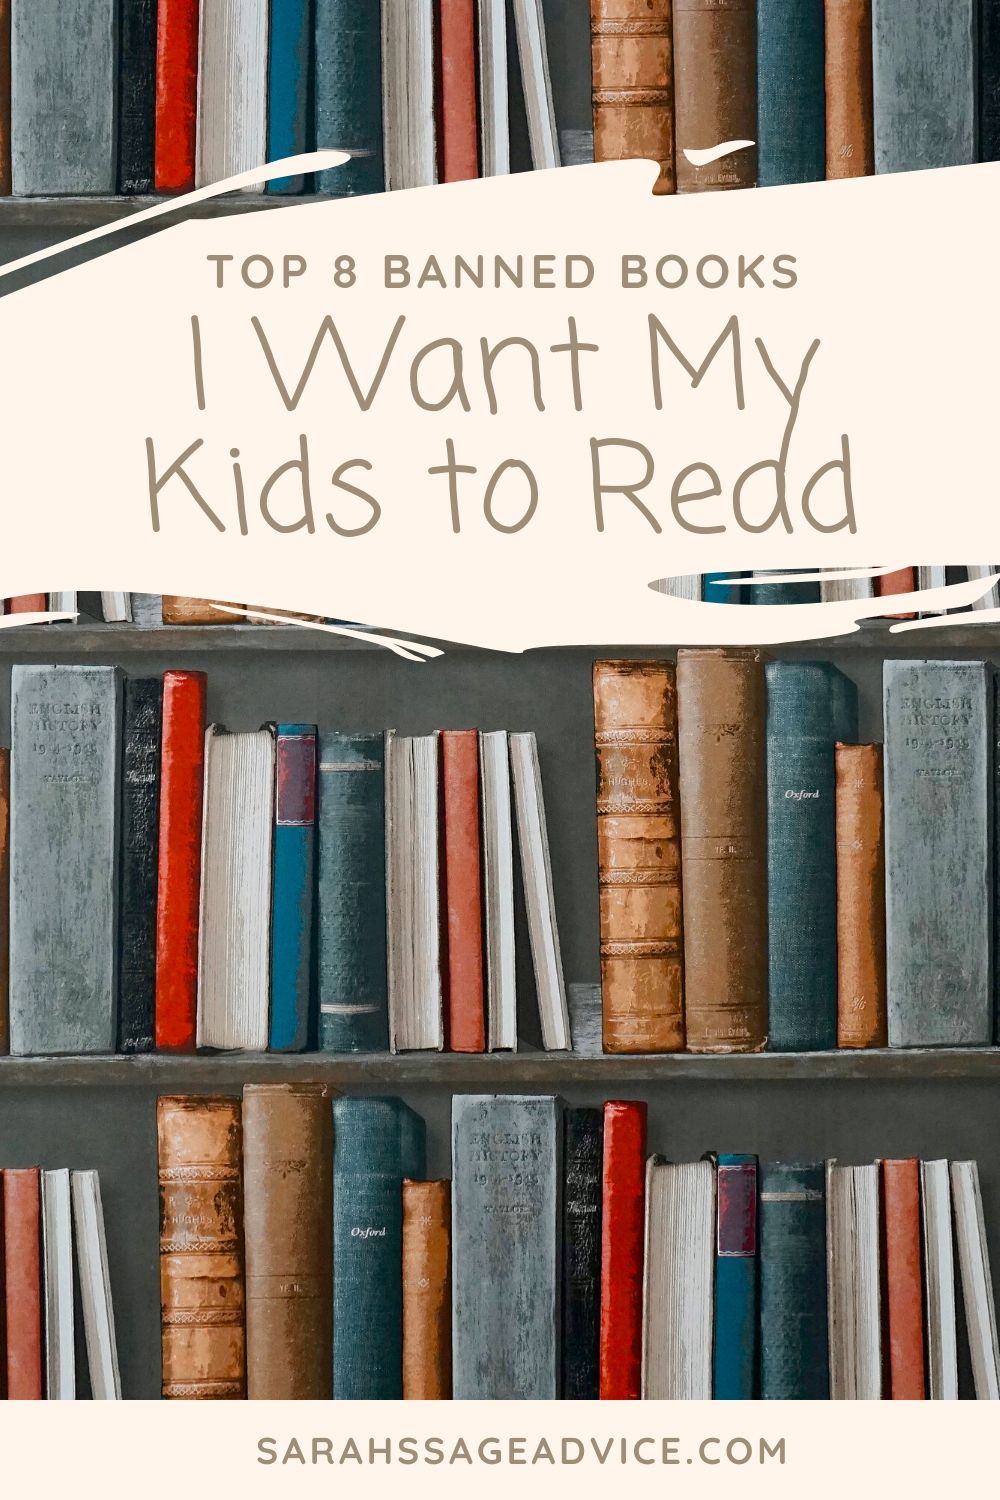 Top 8 Banned Books I Want My Kids to Read Sarah's Sage Advice